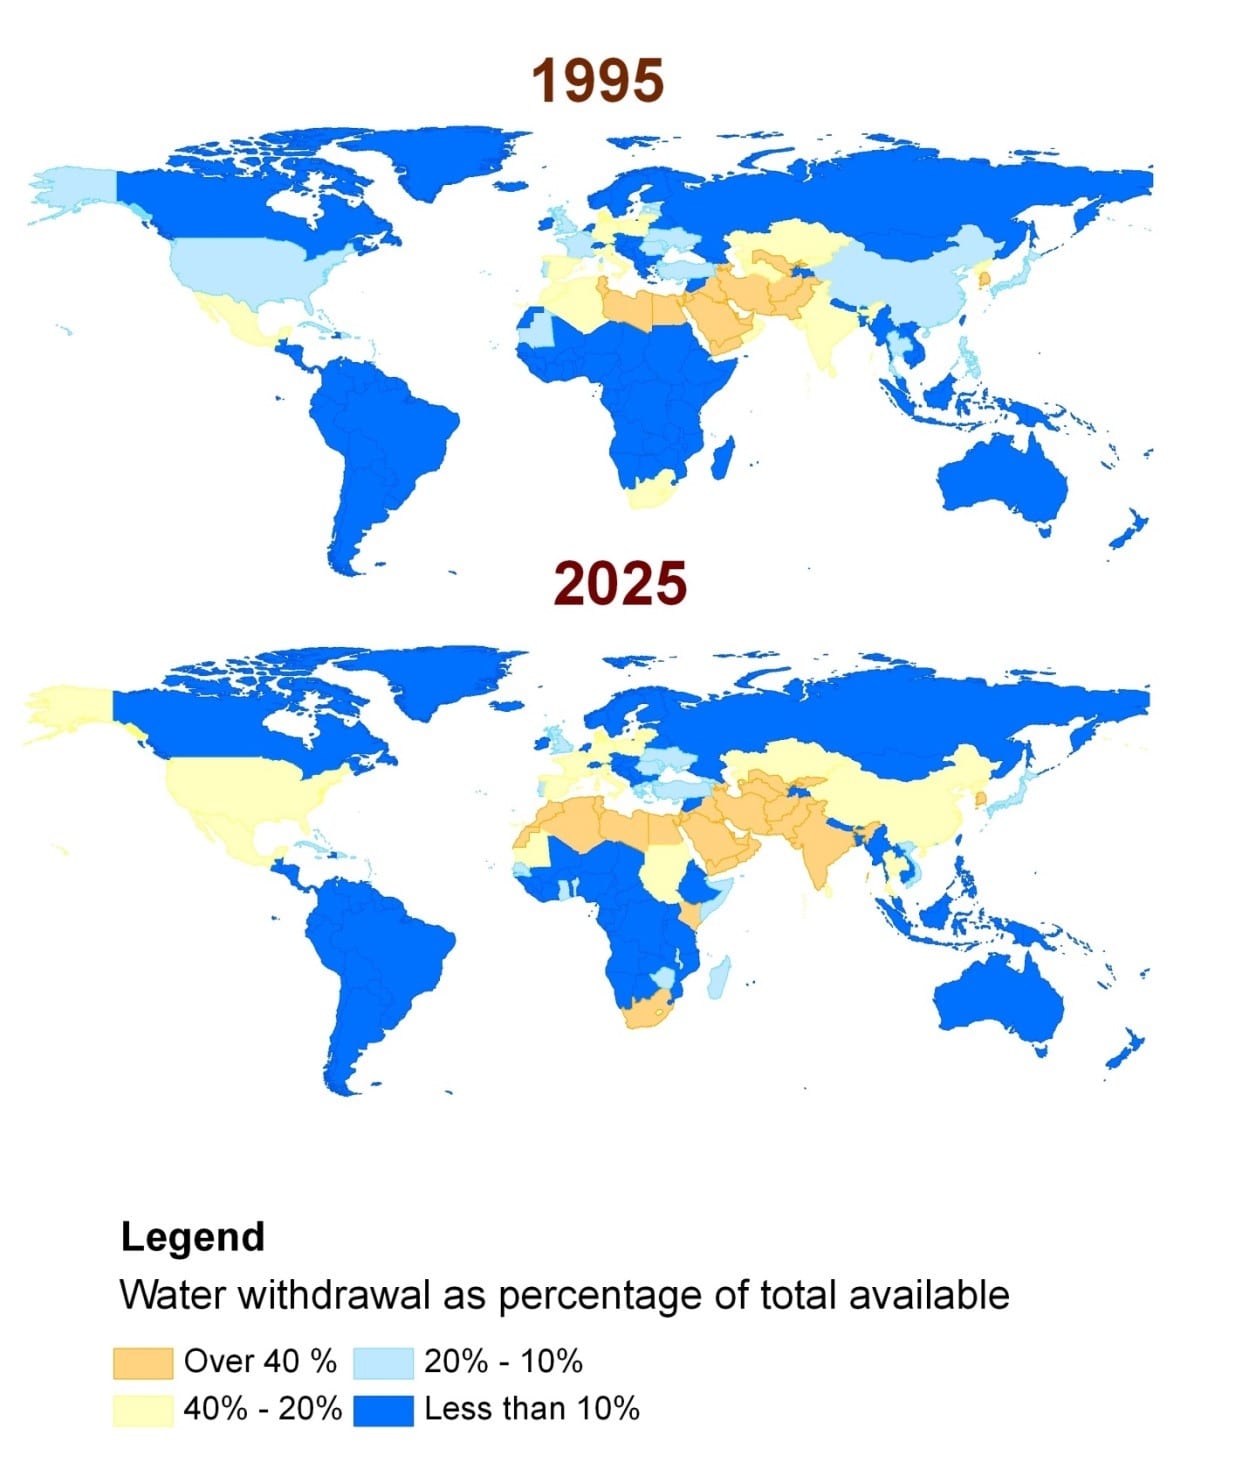 Figure 1. Uneven distribution of water stress projected in the future based on human demand and natural availability. Image Credit: United Nations Environmental Program (UNEP) and American Society of Civil Engineers. 